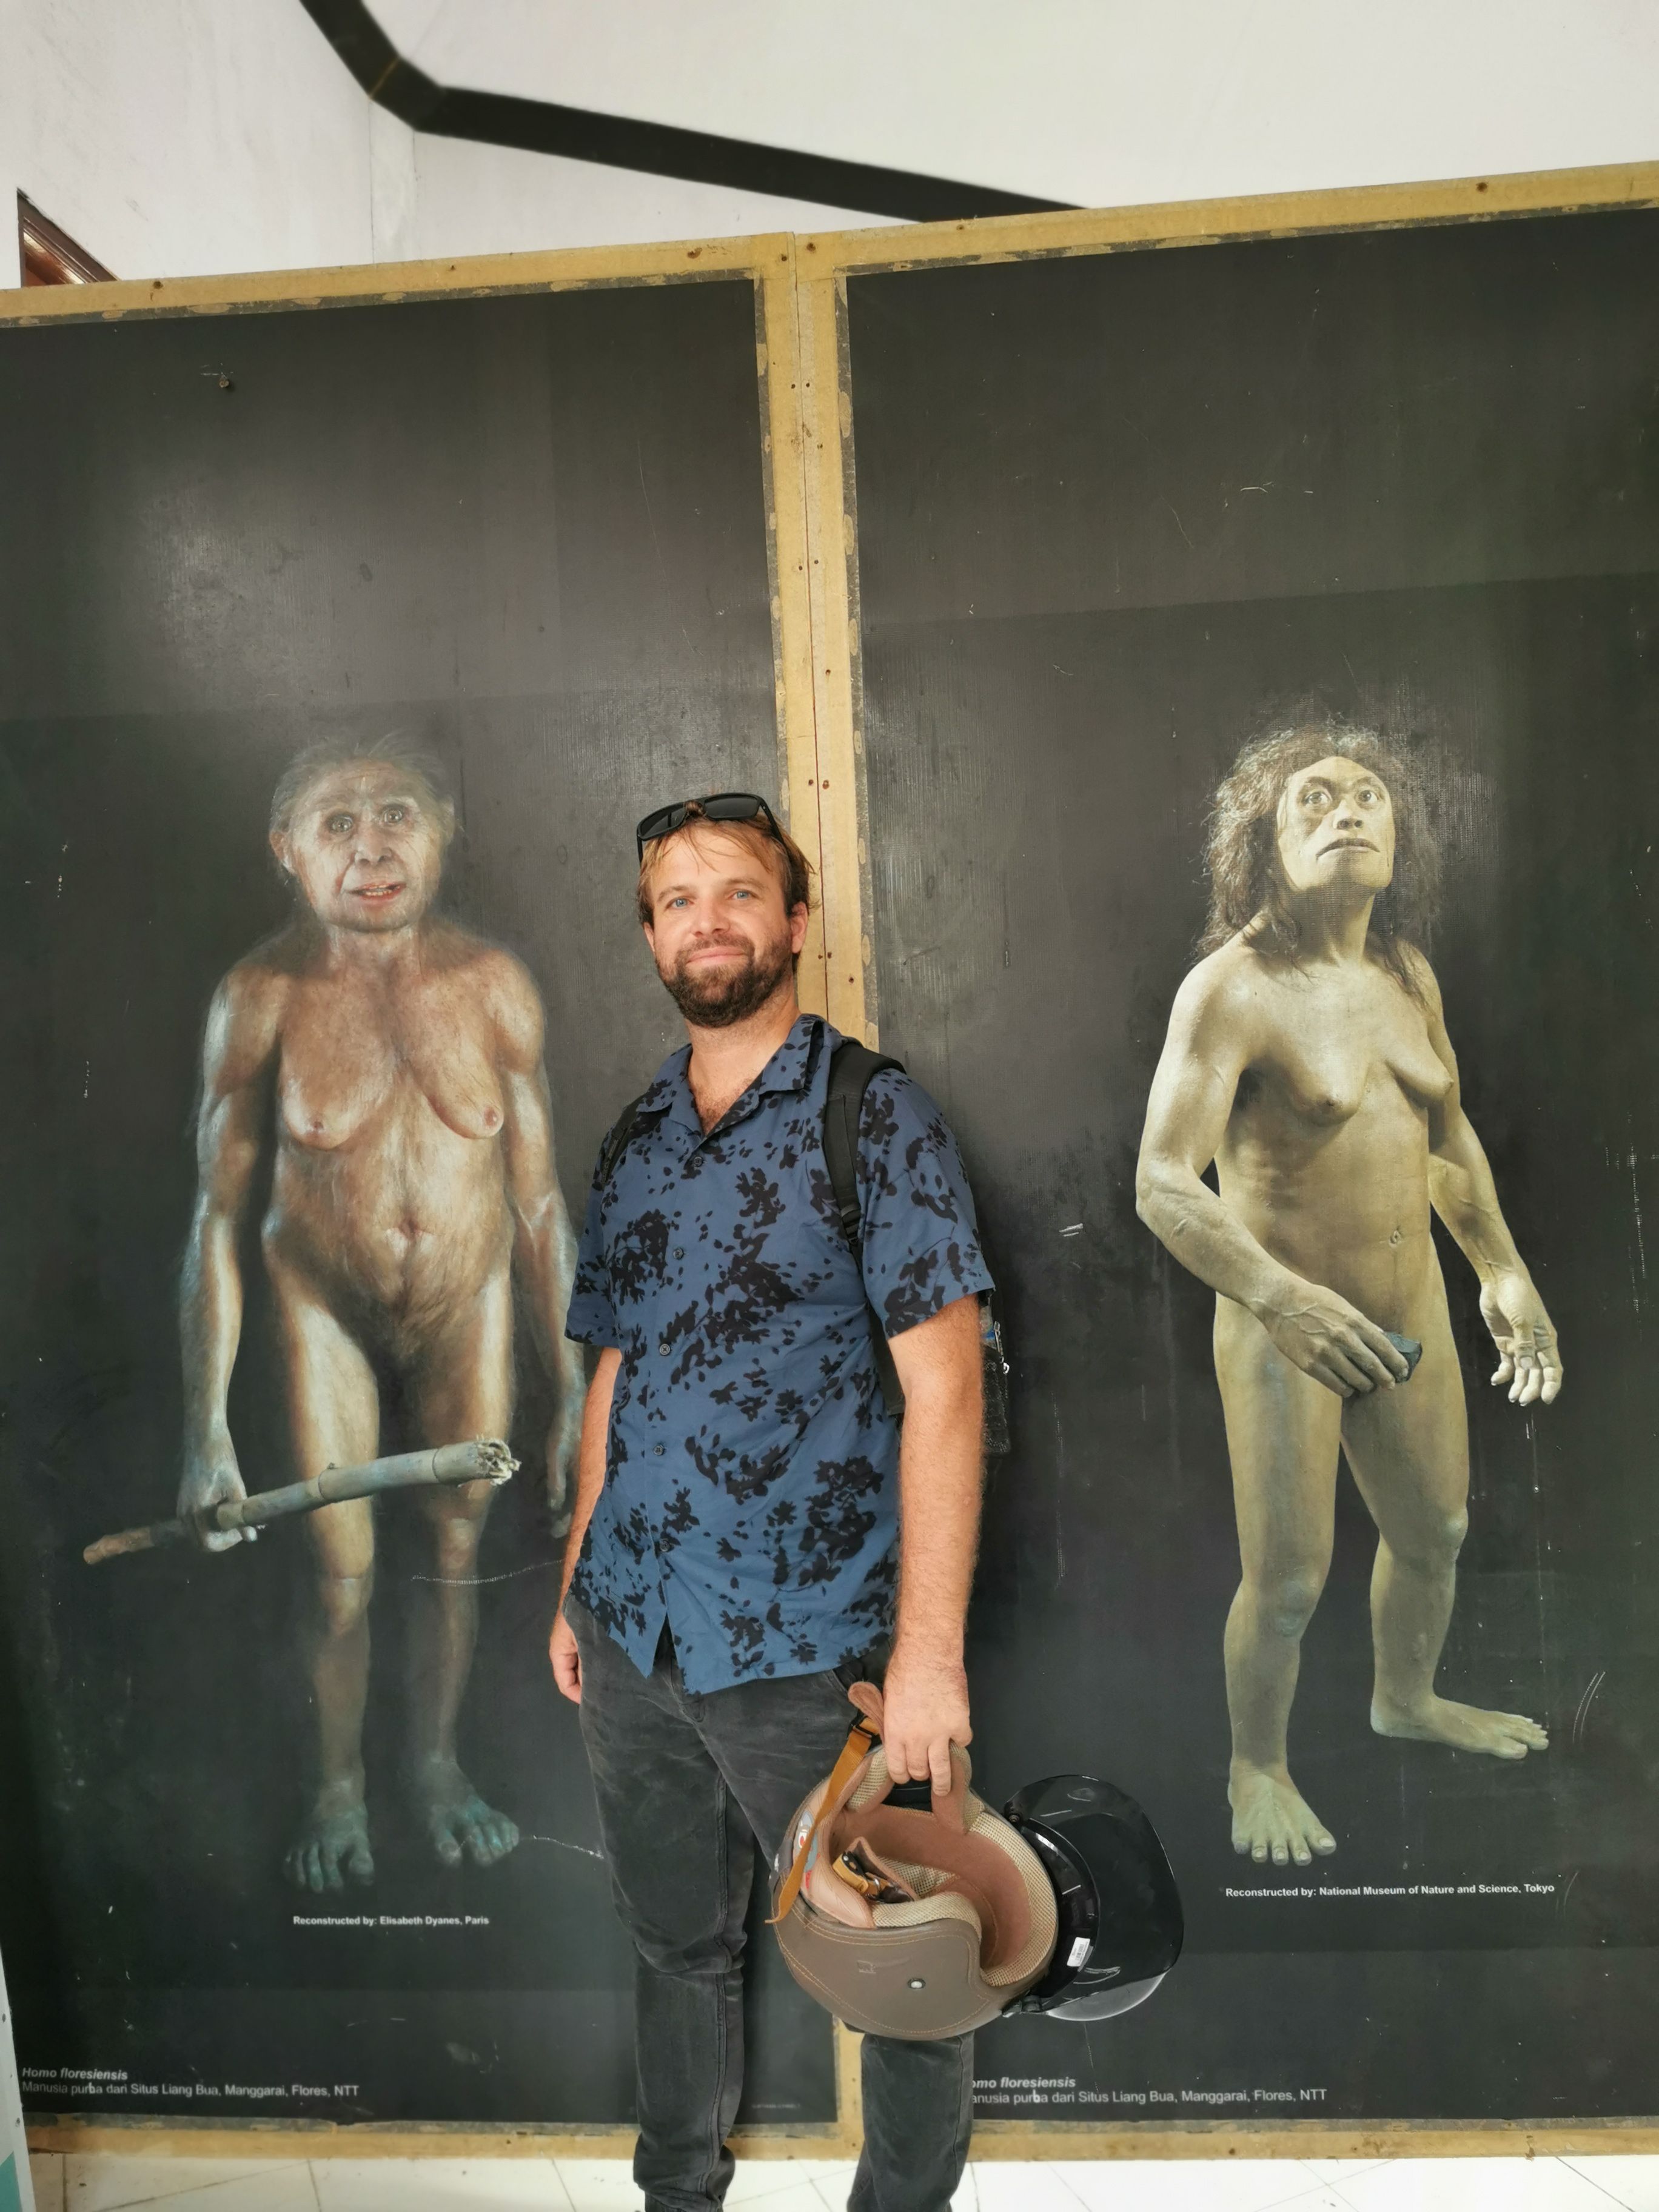 Tourist at Homos Floresiensis museum with artistic reproductions of the archaic humans